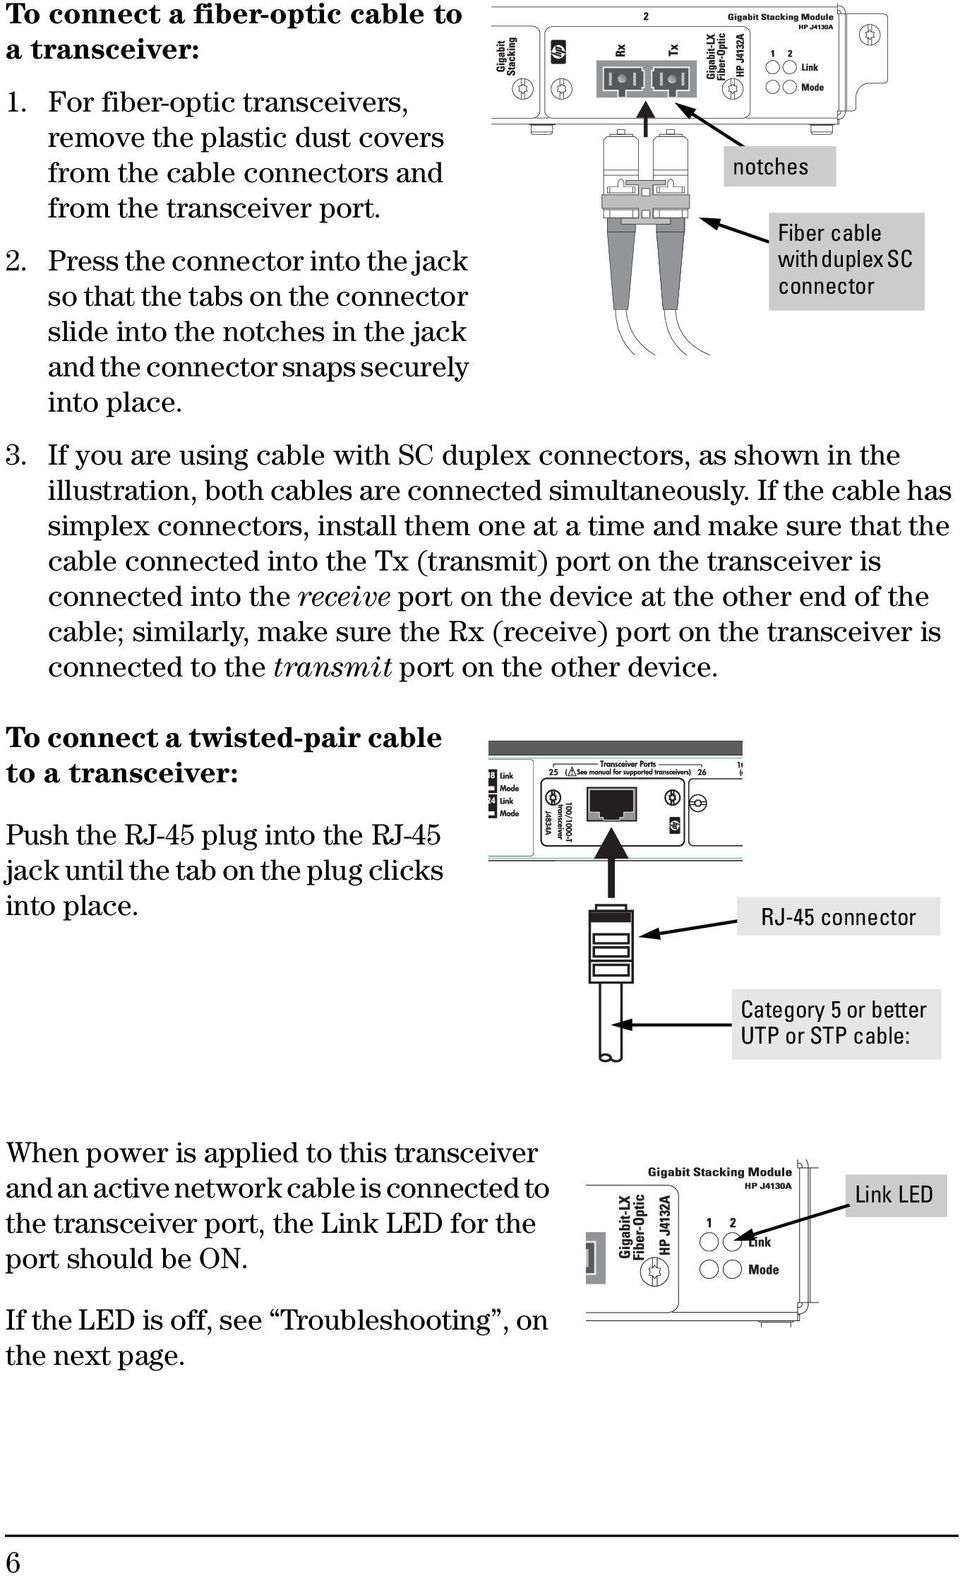 If you are using cable with SC duplex connectors, as shown in the illustration, both cables are connected simultaneously.